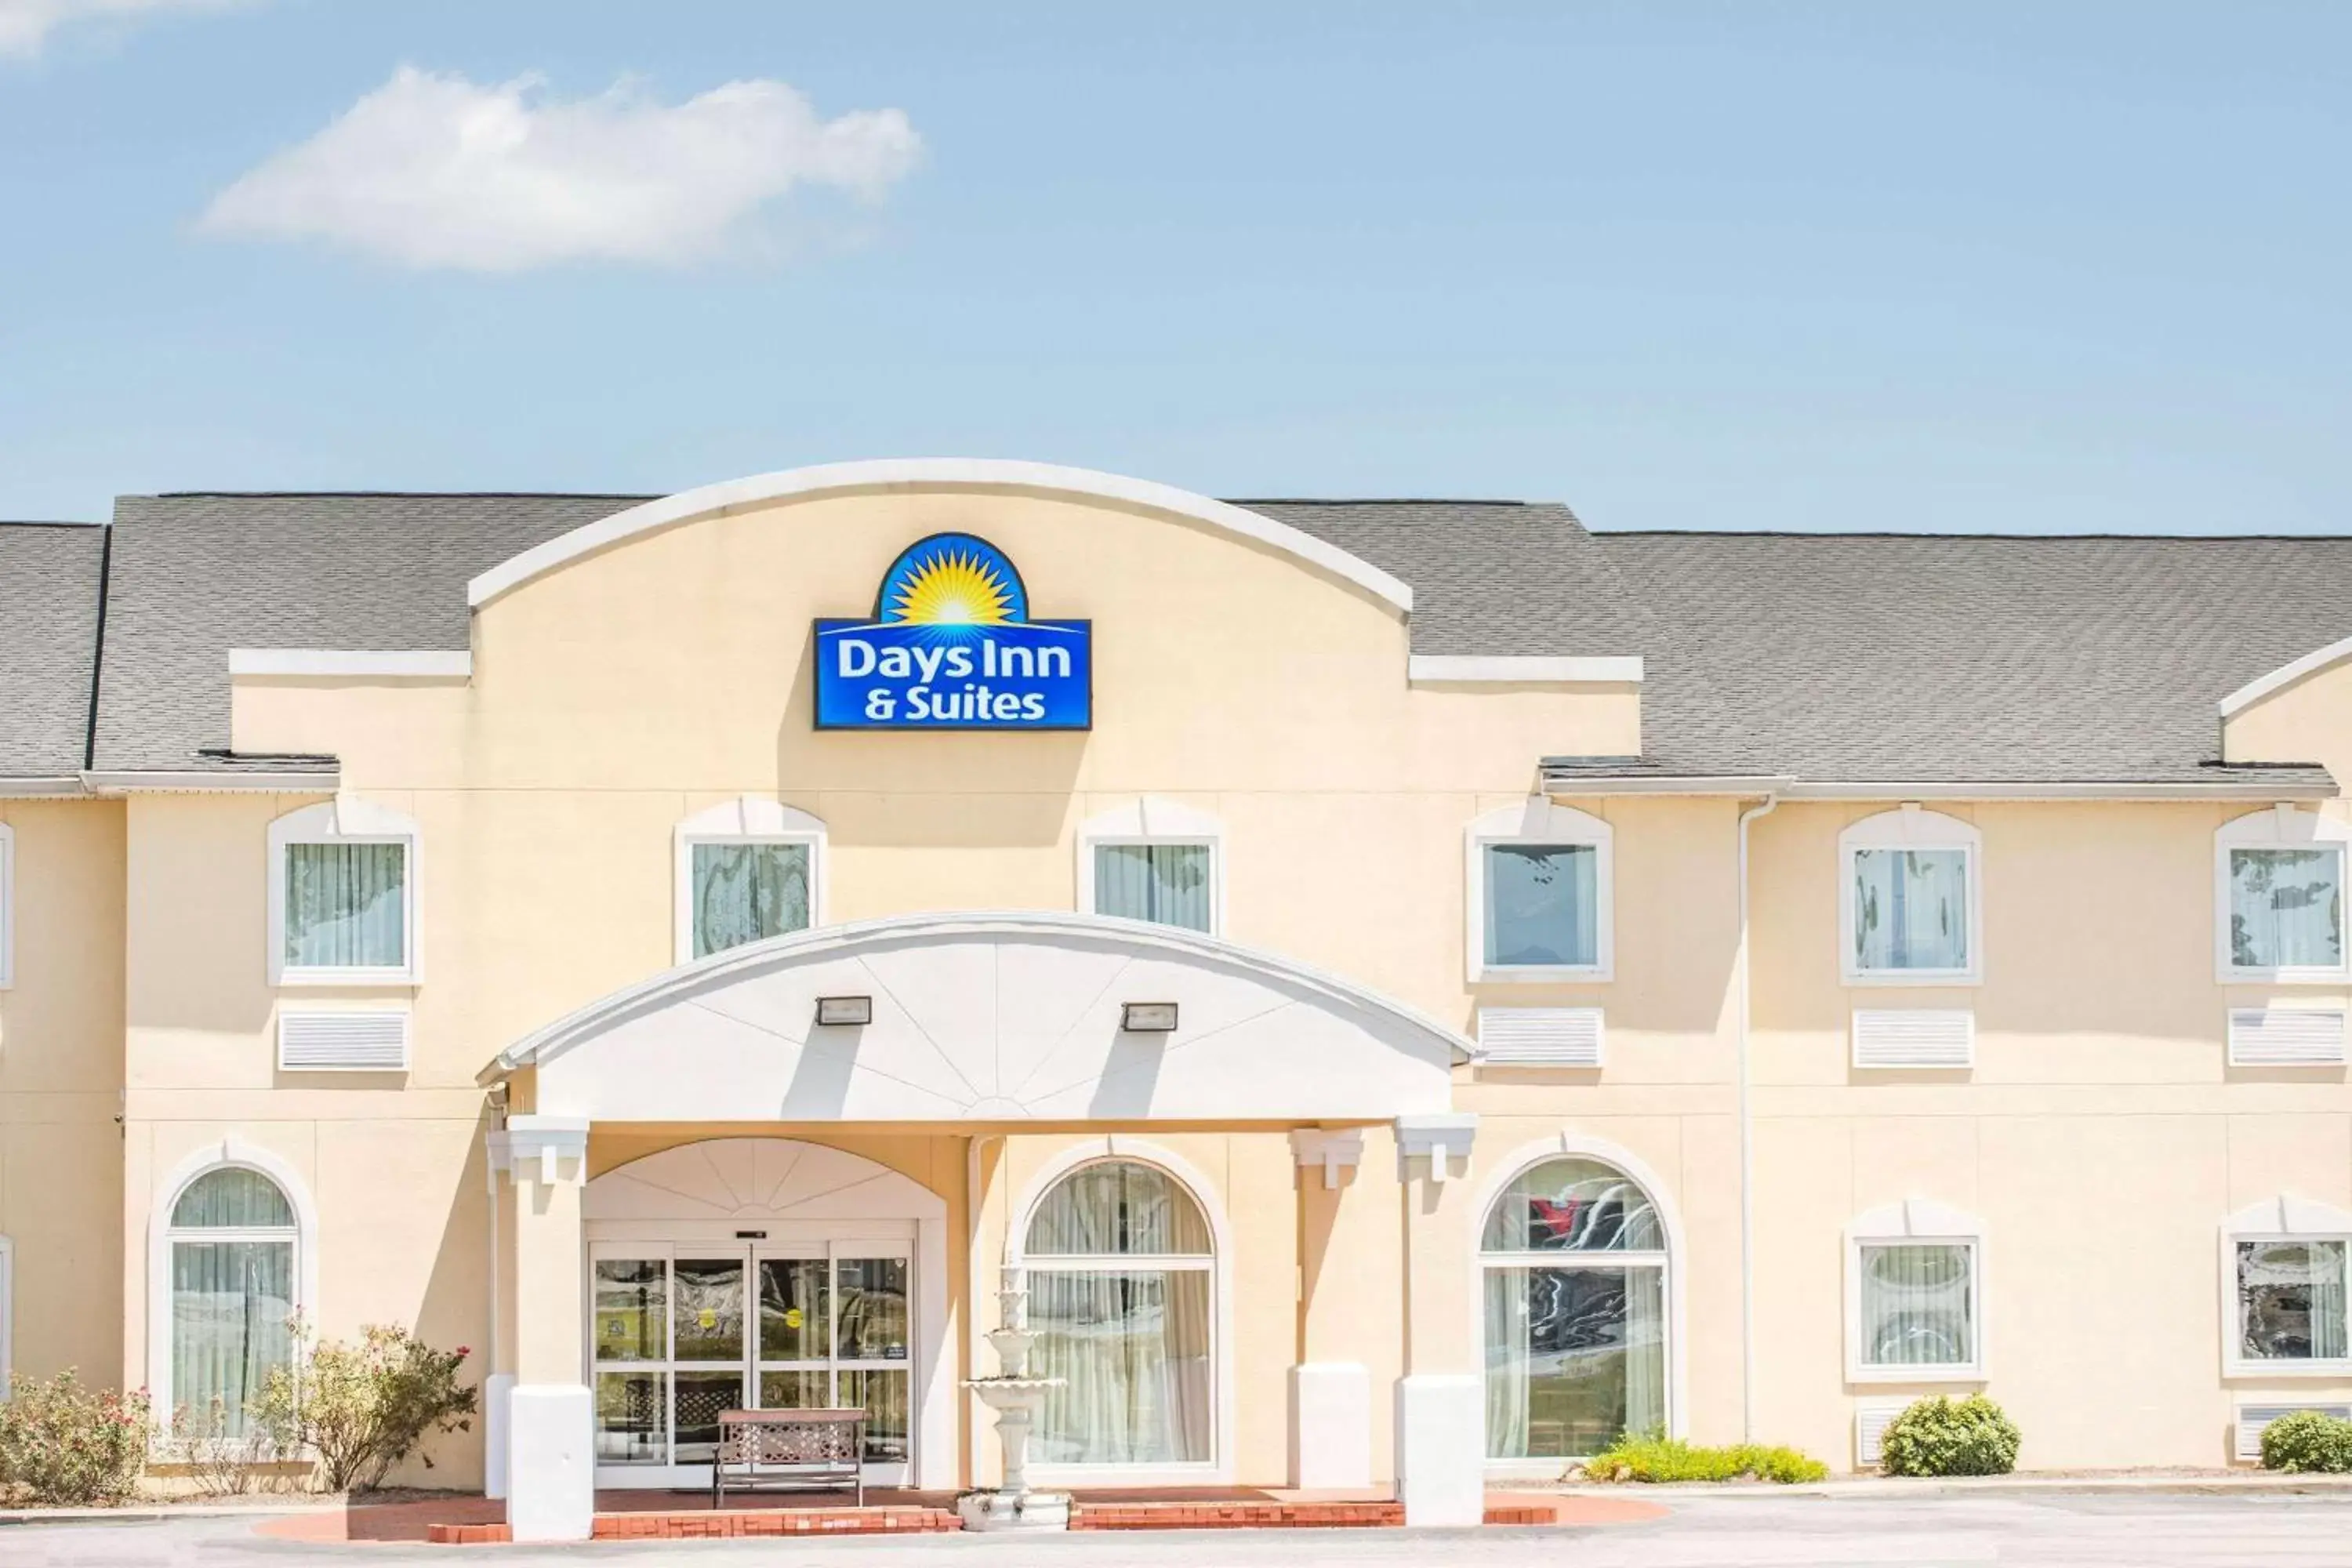 Property building in Days Inn & Suites by Wyndham Swainsboro